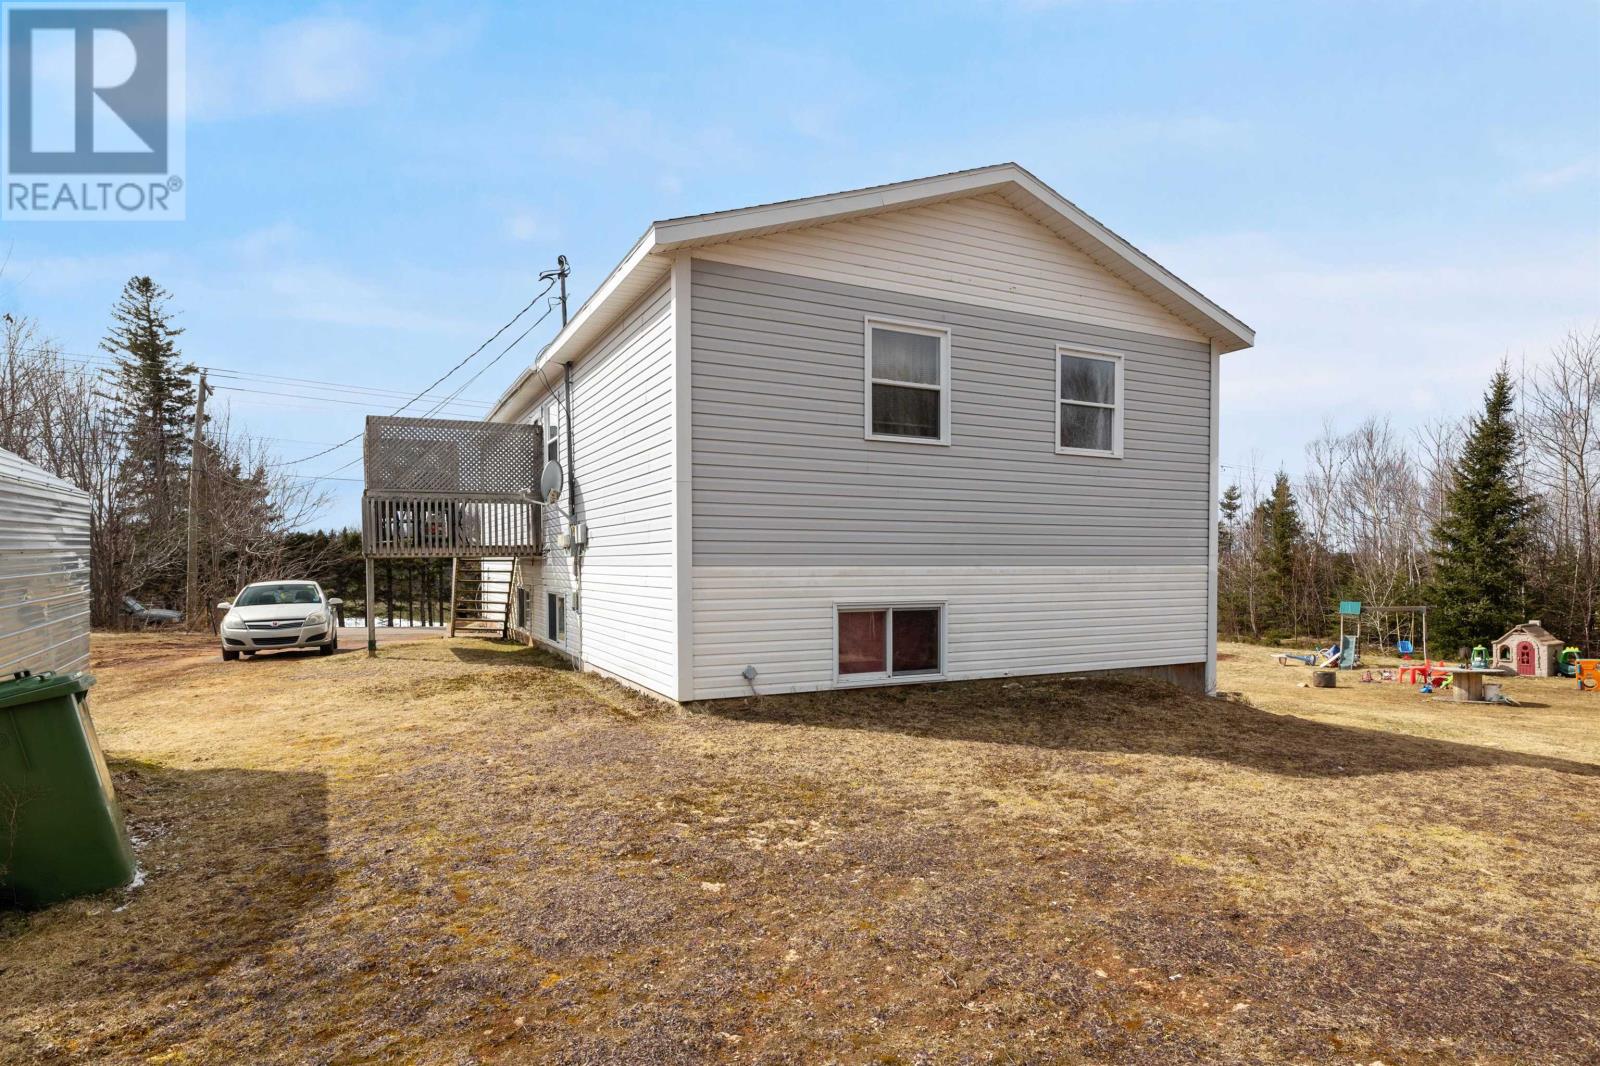 5819/5821 Campbell Road, Victoria Cross, Montague, Prince Edward Island  C0A 1R0 - Photo 2 - 202405682